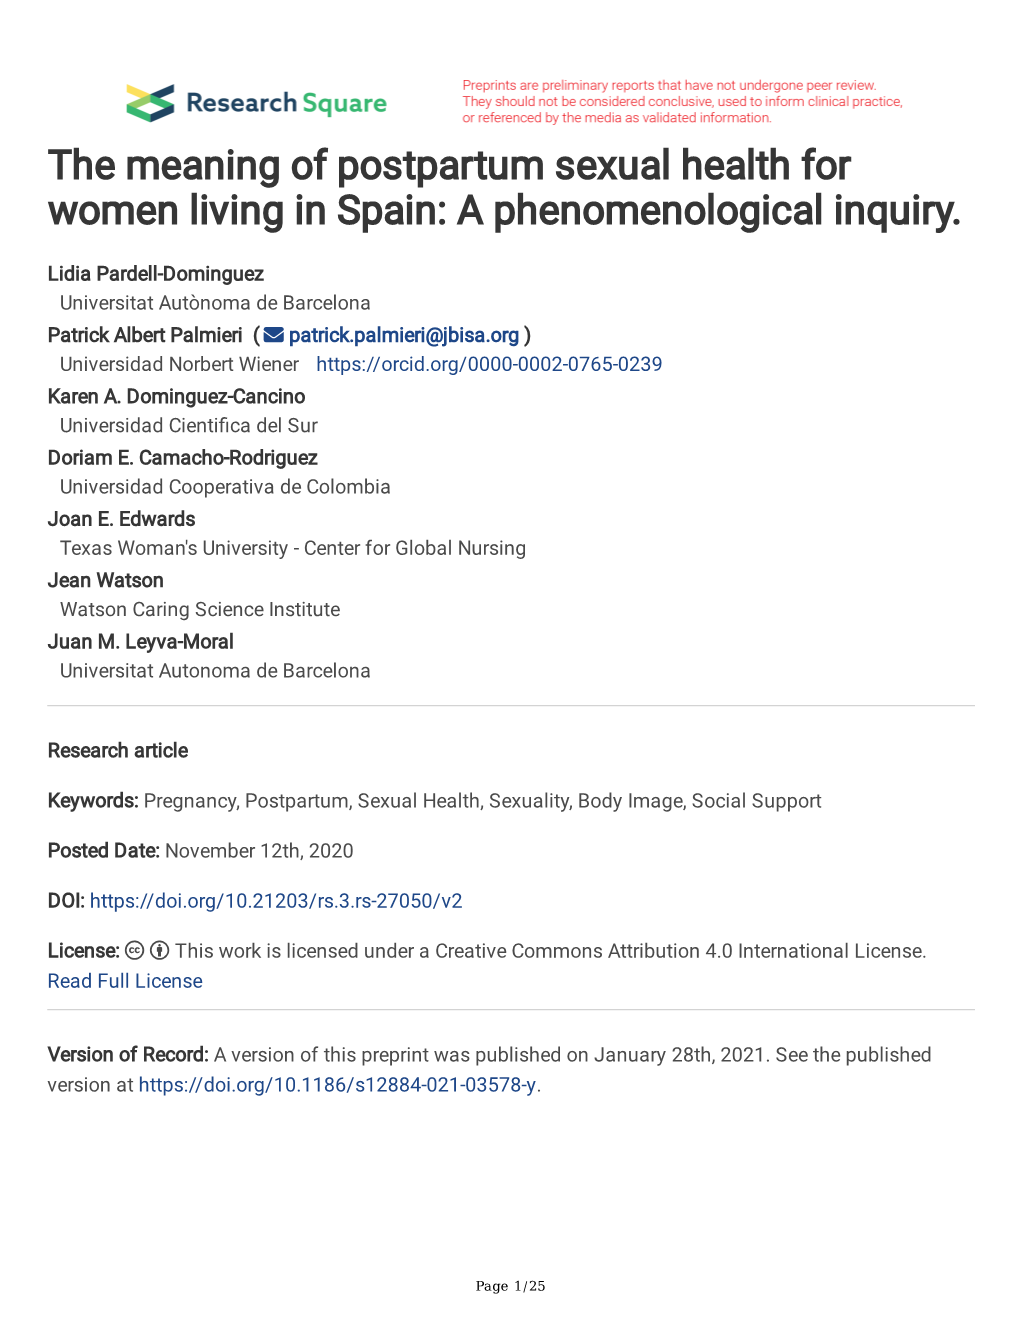 The Meaning of Postpartum Sexual Health for Women Living in Spain: a Phenomenological Inquiry